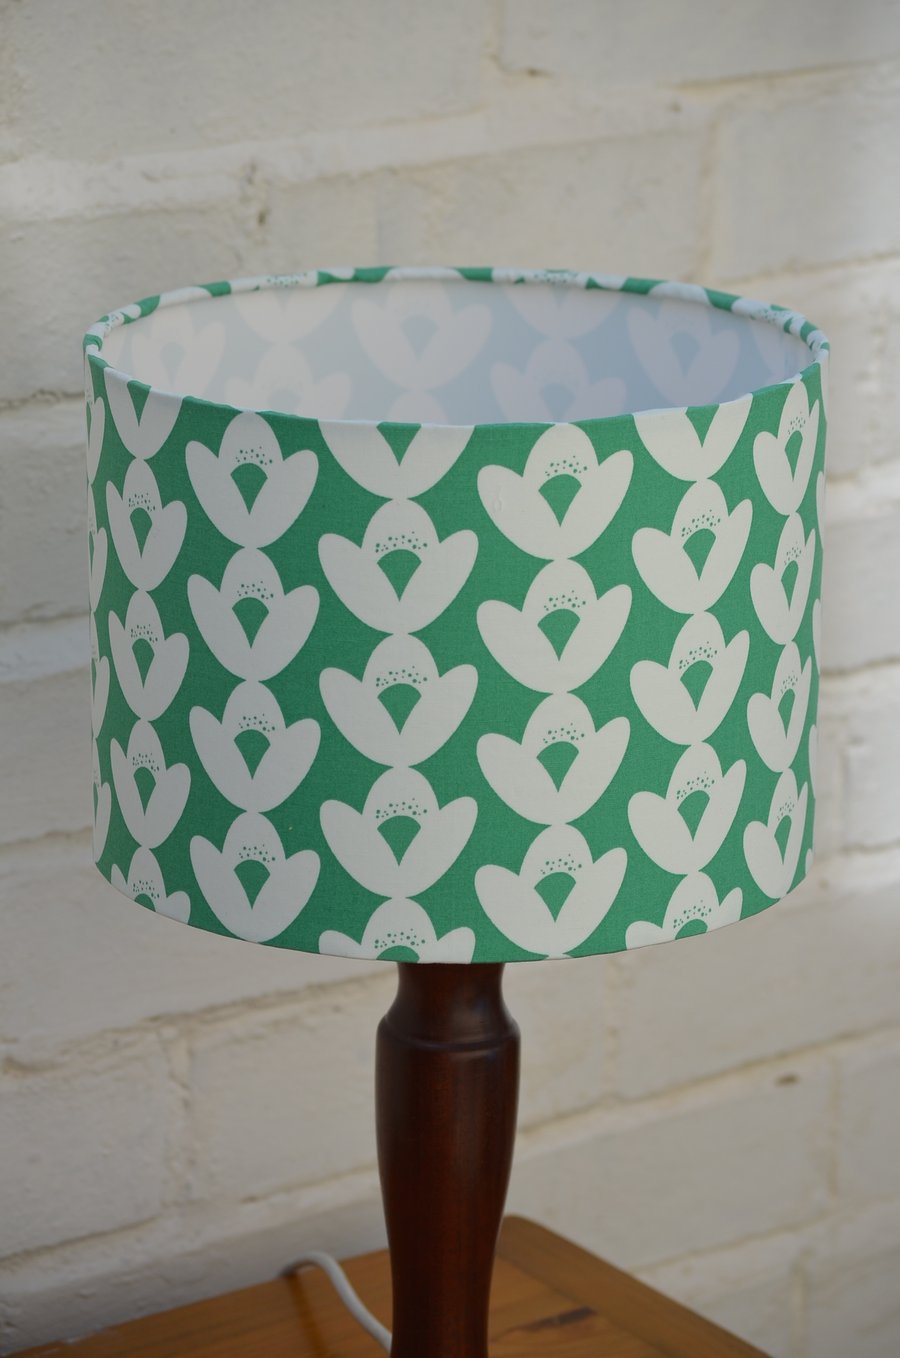 20cm Green and White Floral Lamp shade